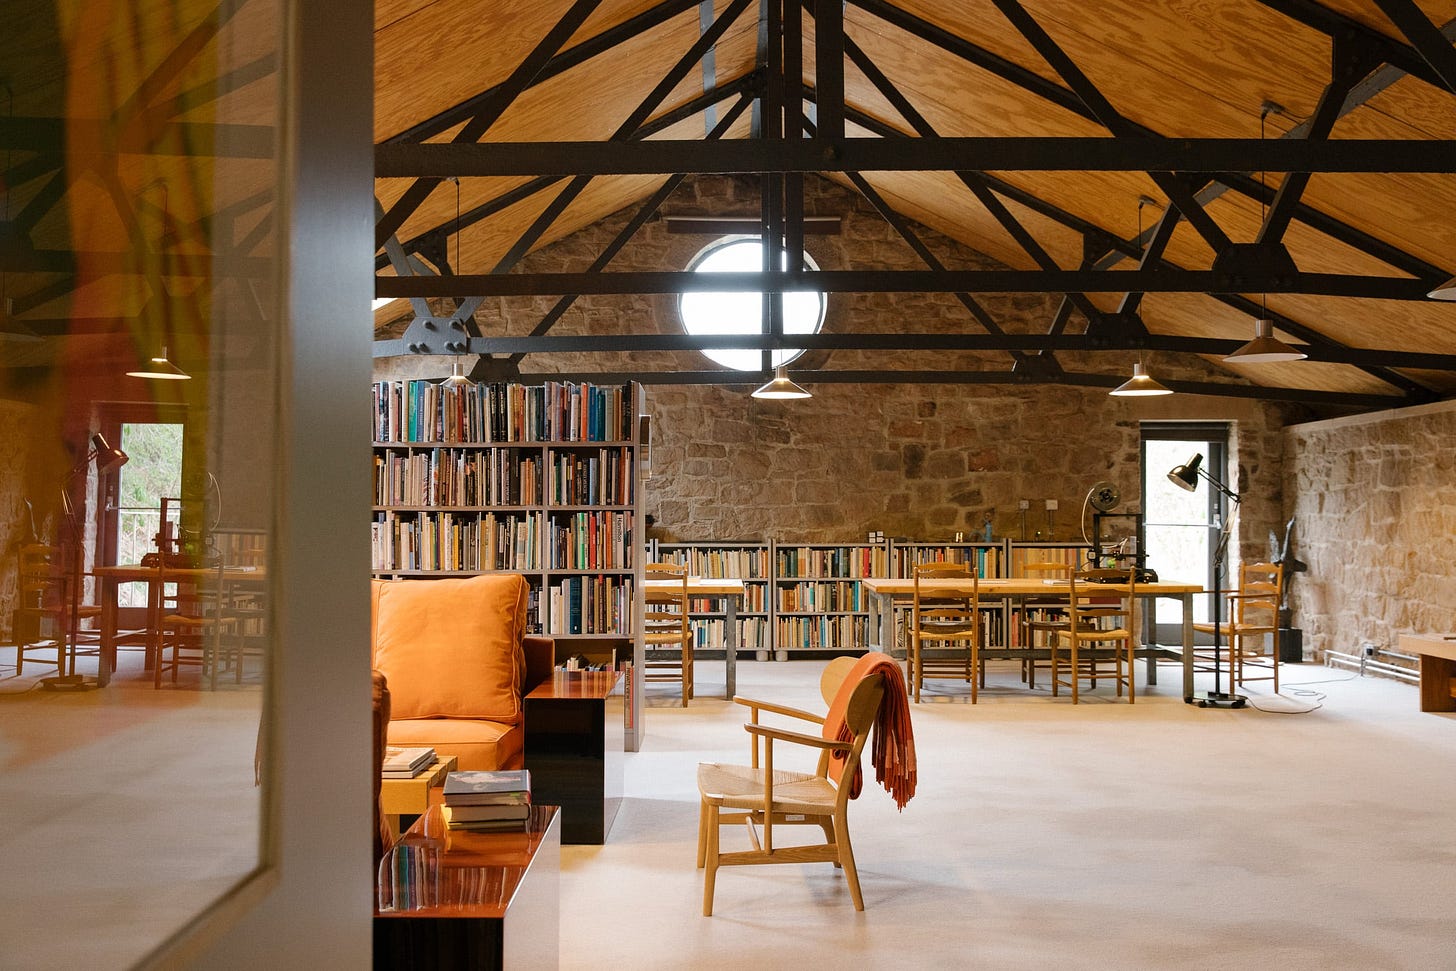 A living room with a vaulted ceiling and exposed steel frame. Bookshelves to the back of the room, mid-century oak tables and chairs. 